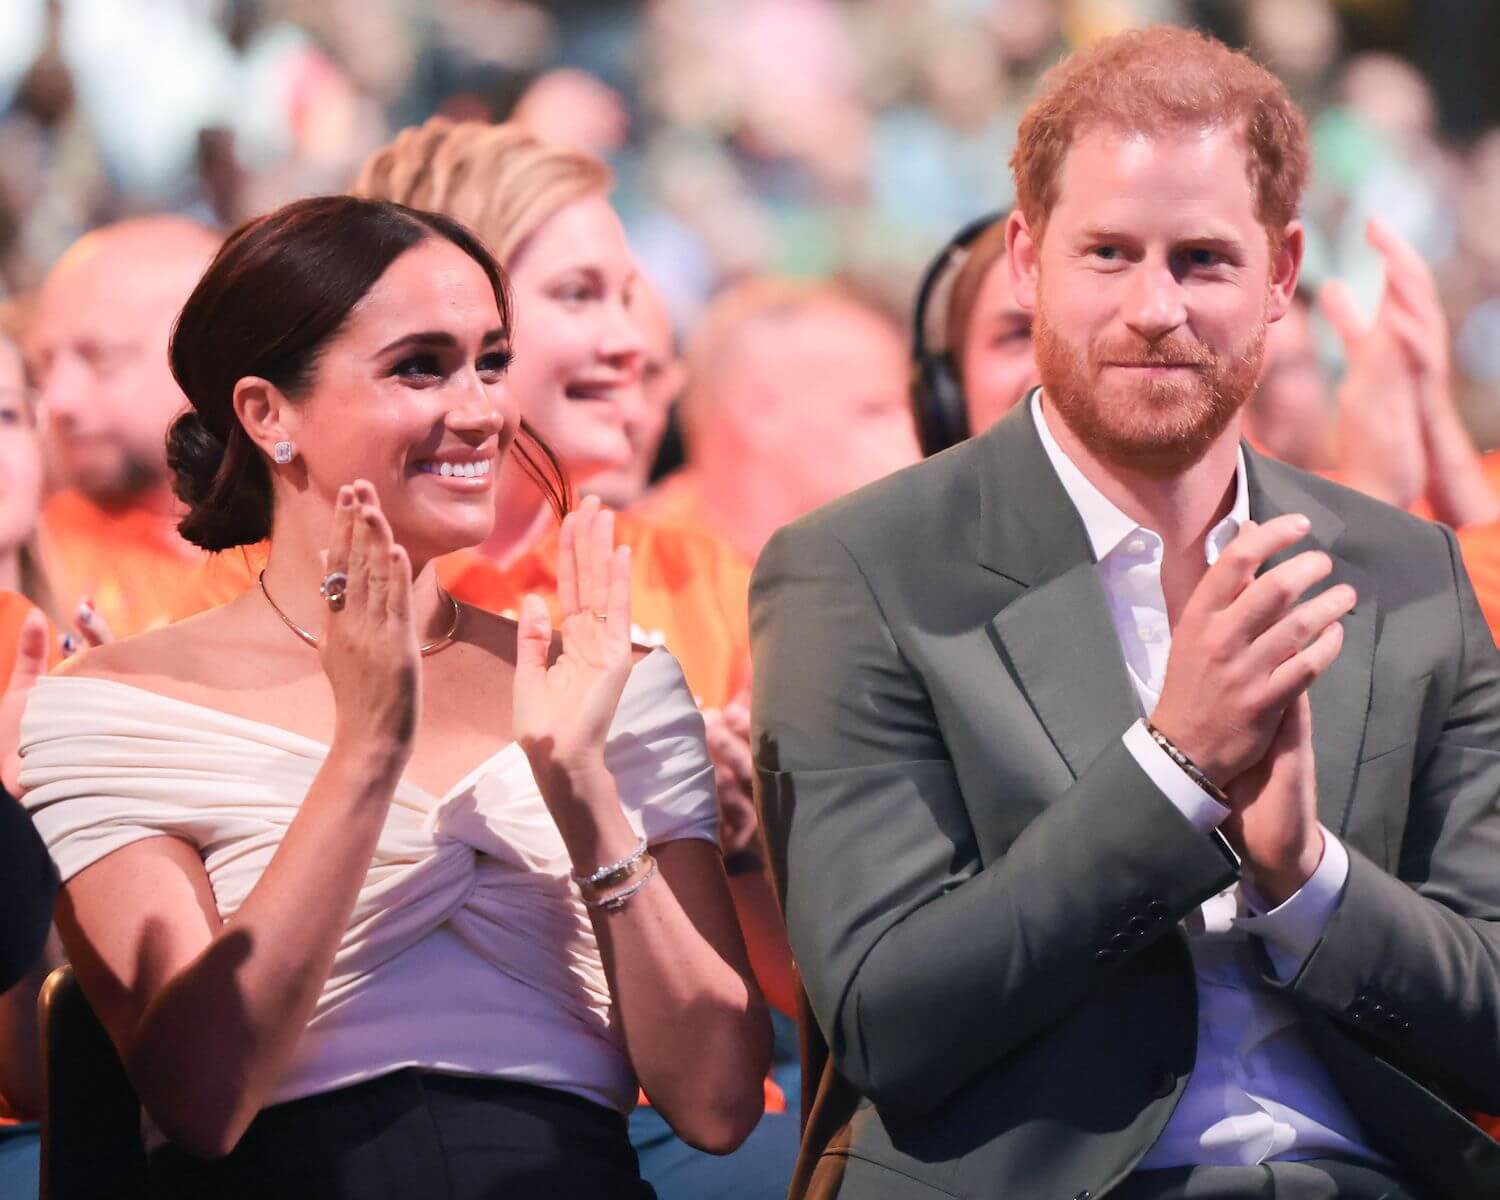 Pr Expert Says Prince Harry And Meghan Markle Face Damned If You Do Damned If You Don T